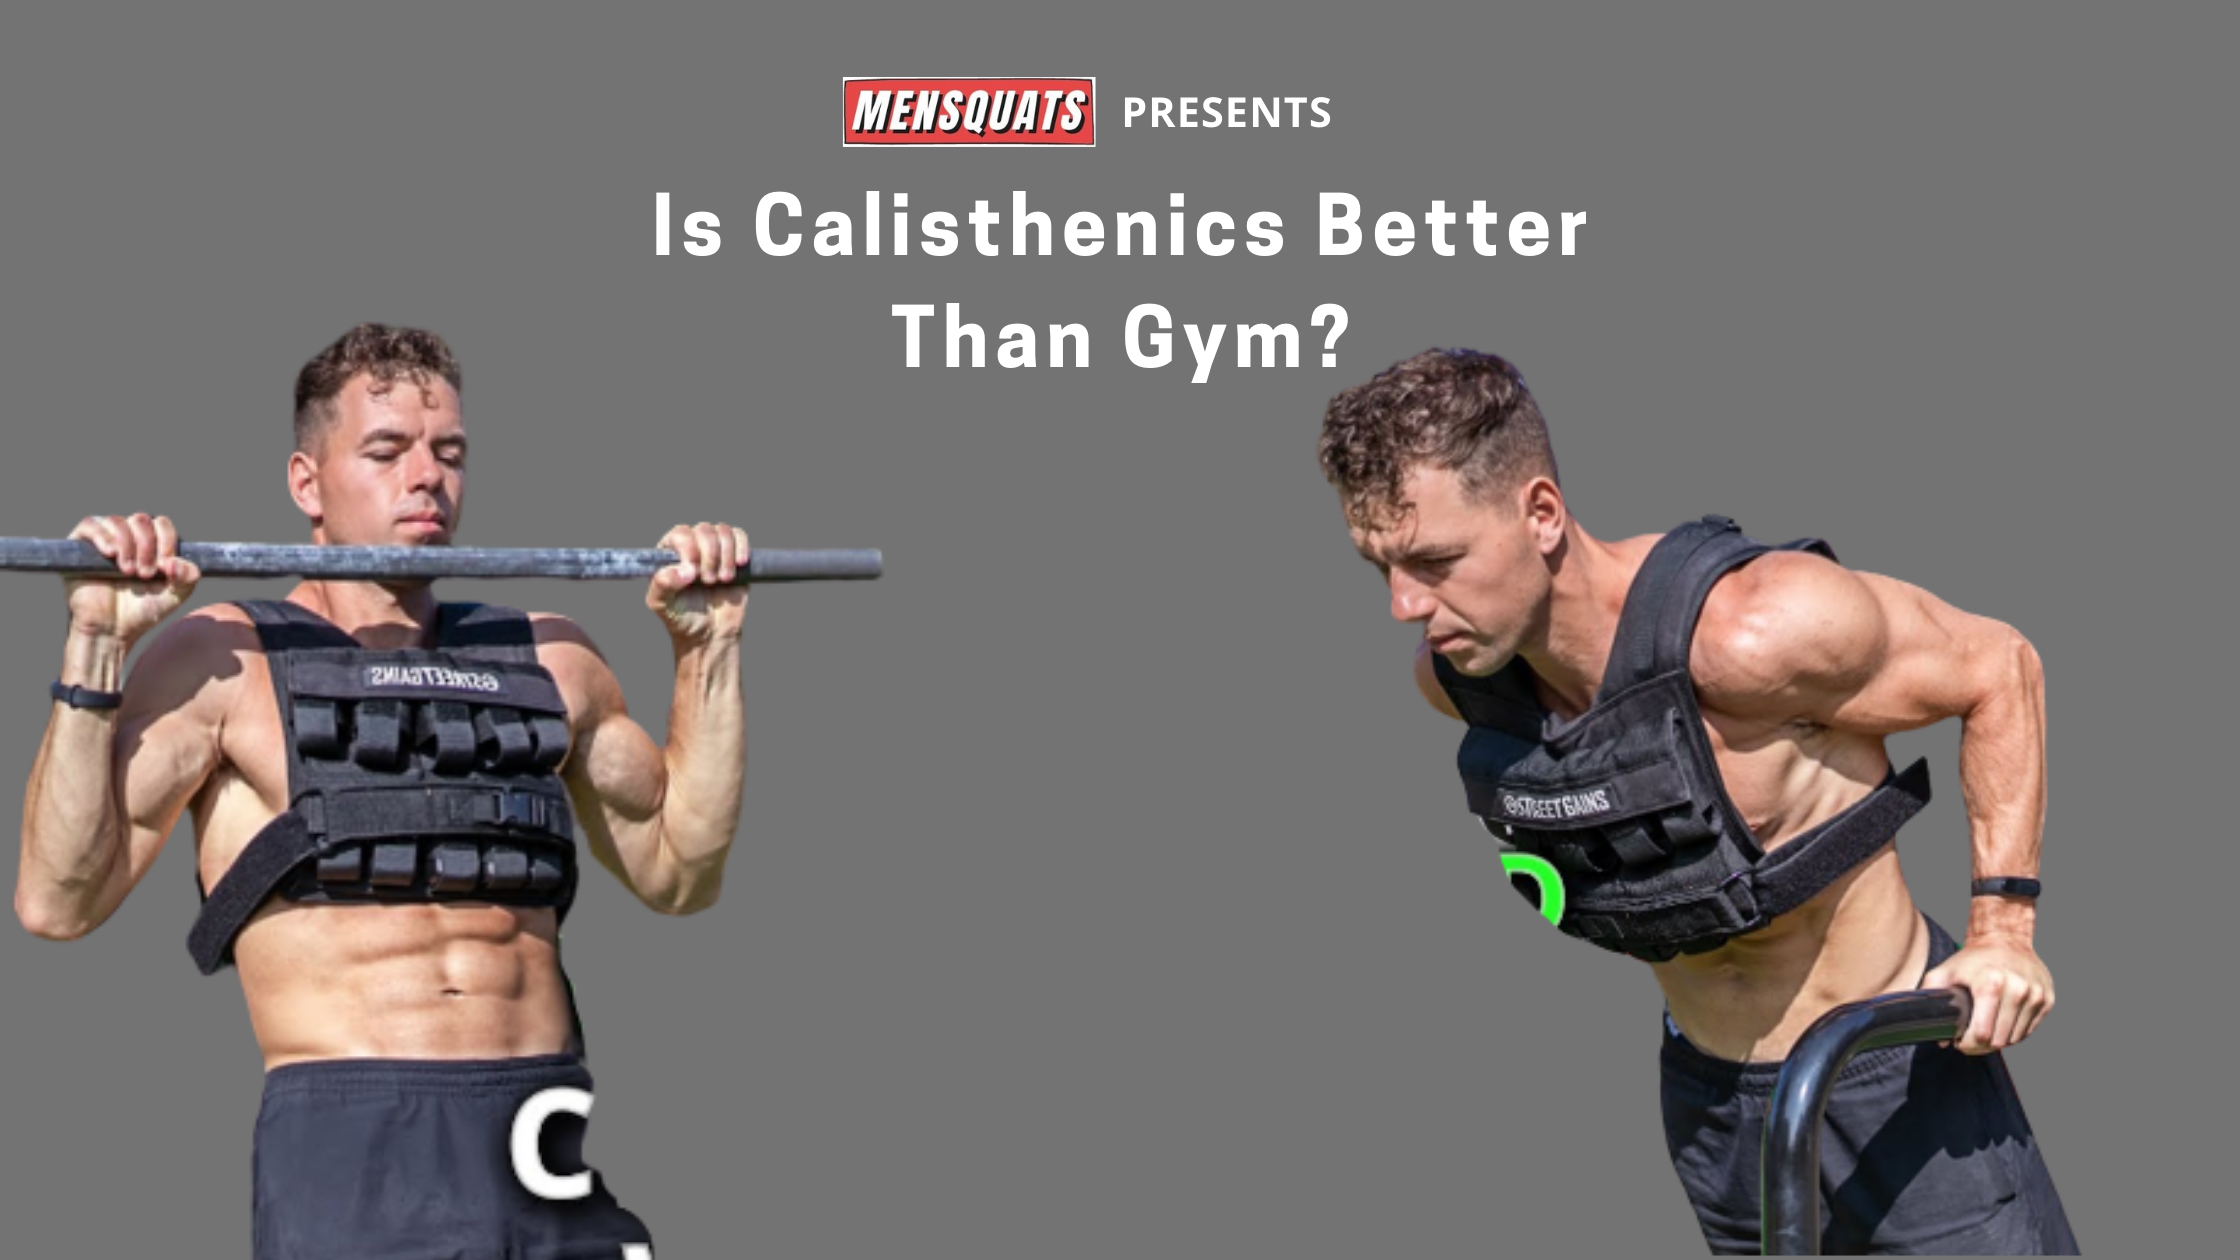 does weighted callisthenics build muscle? is calisthenics better than gym